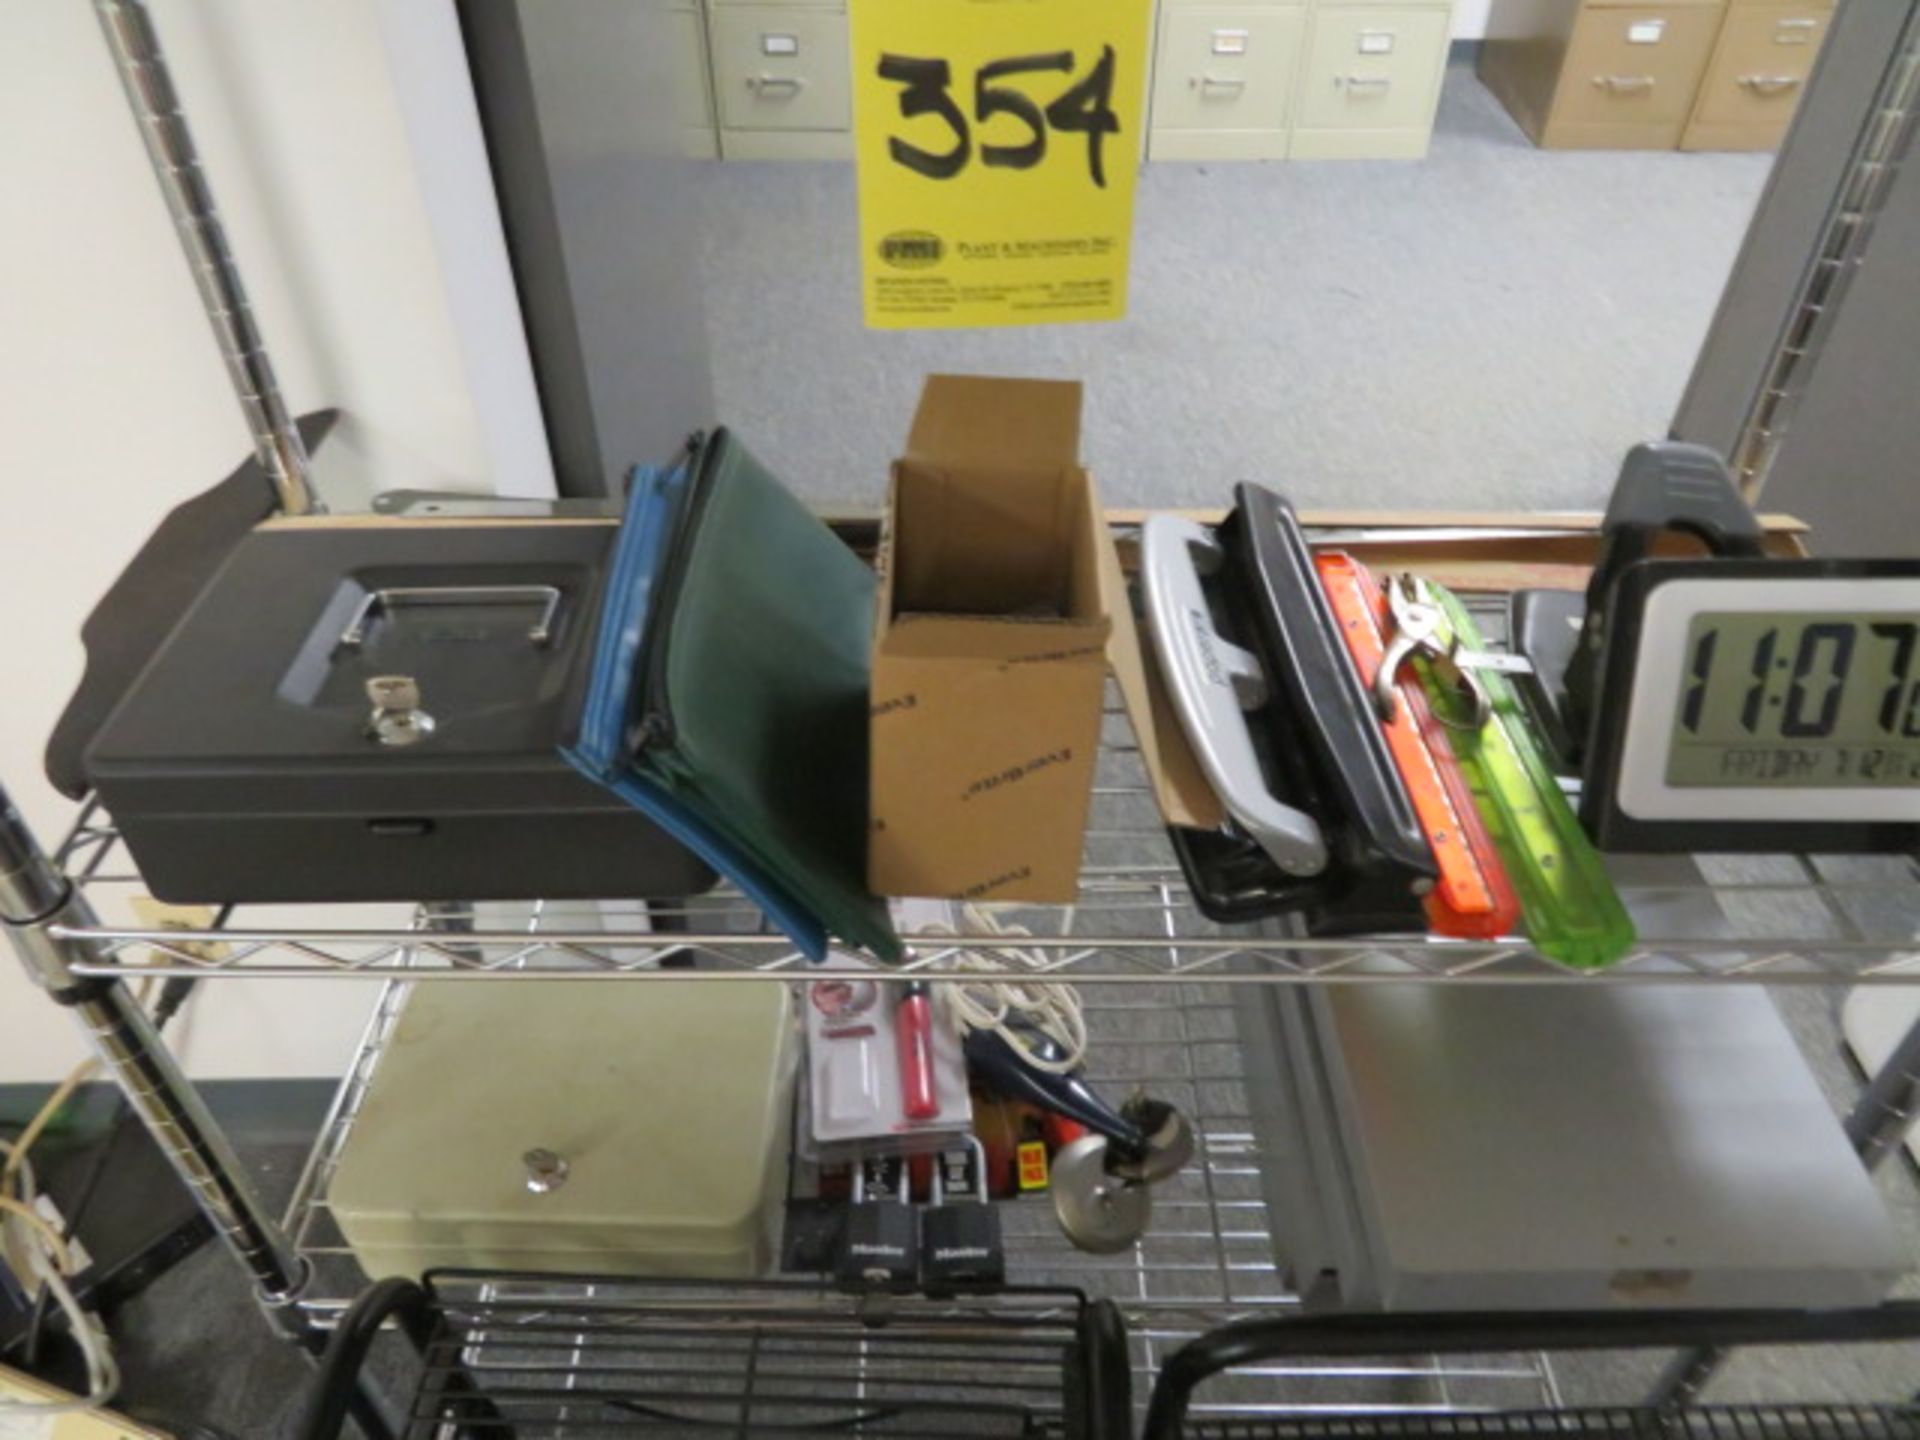 LOT CONSISTING OF: 4-shelf storage rack, (2) rolling wire file storage units, (3) trash cans, - Image 3 of 6